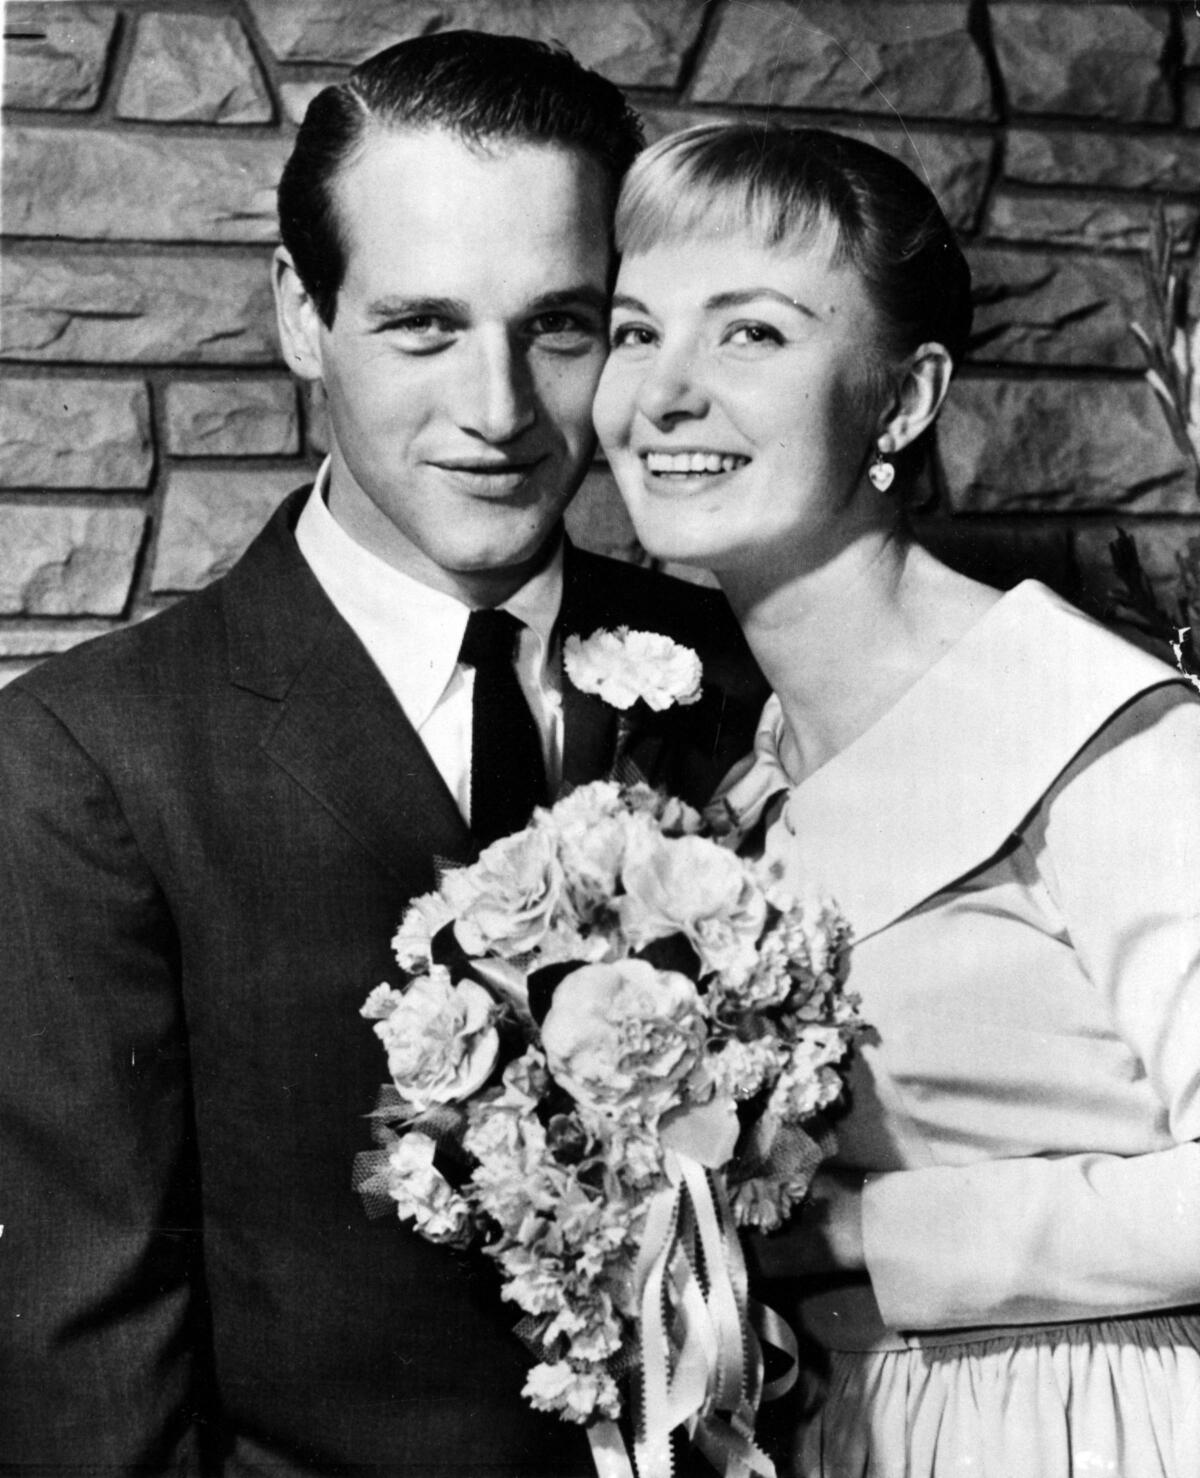 Paul Newman and Joanne Woodward smile together in 1958